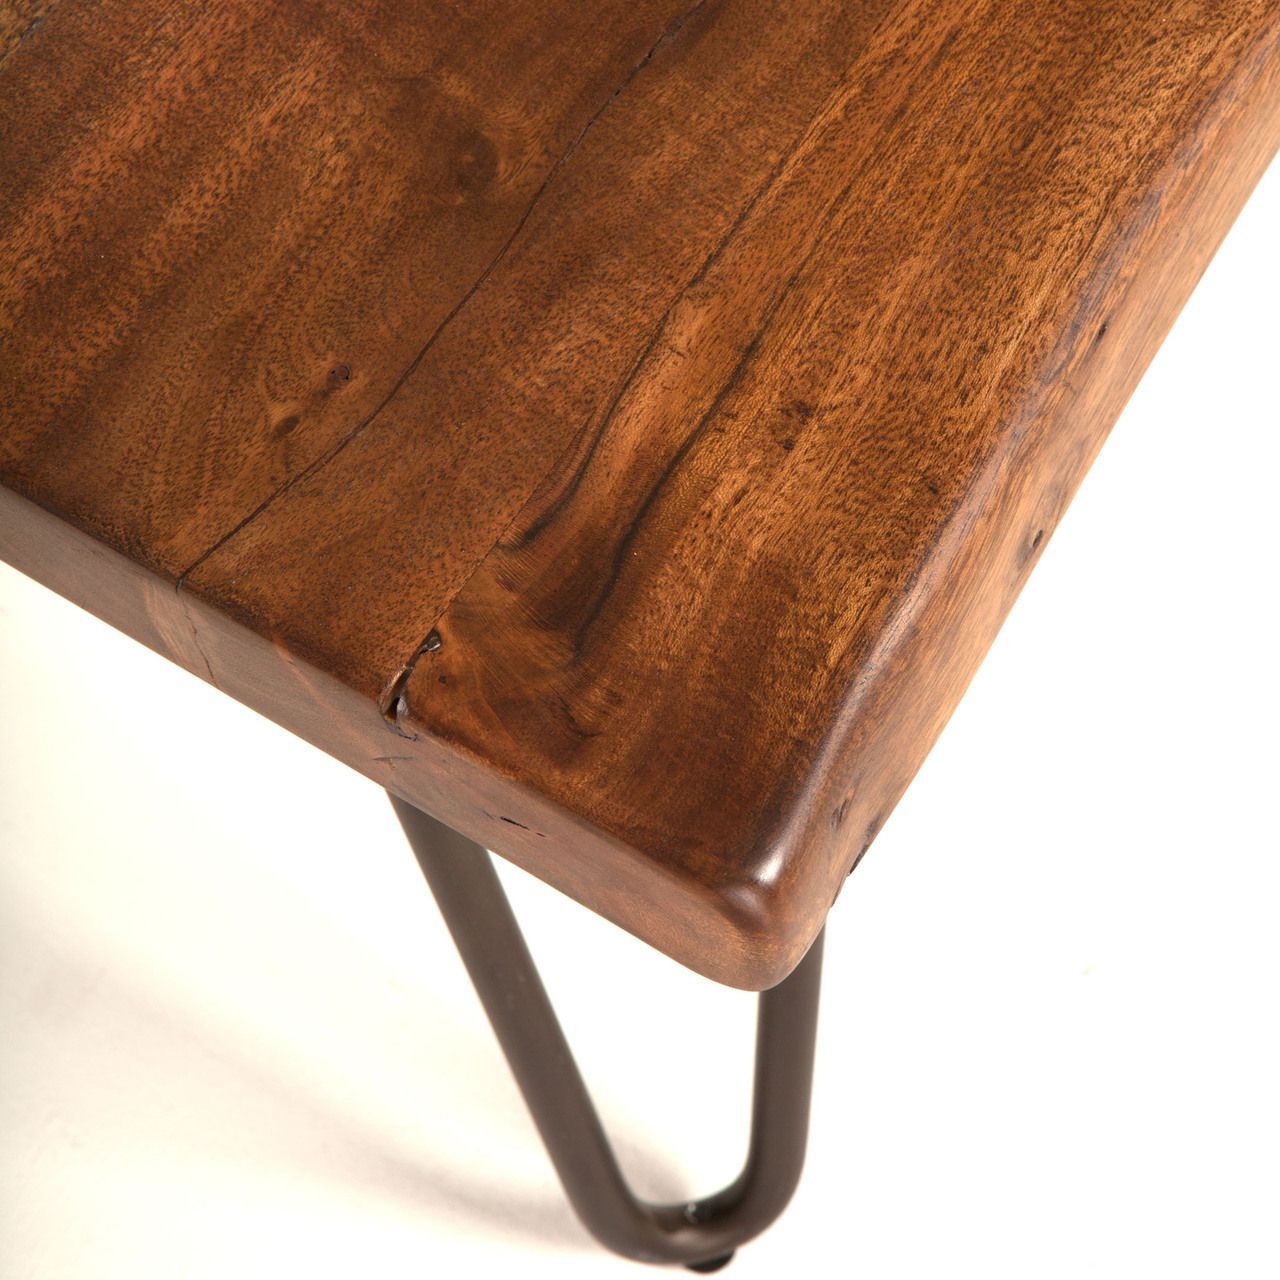 Vail Solid Wood Coffee Table In Walnut W/ Steel Legs | Solid Wood Inside Coffee Tables With Solid Legs (View 11 of 20)